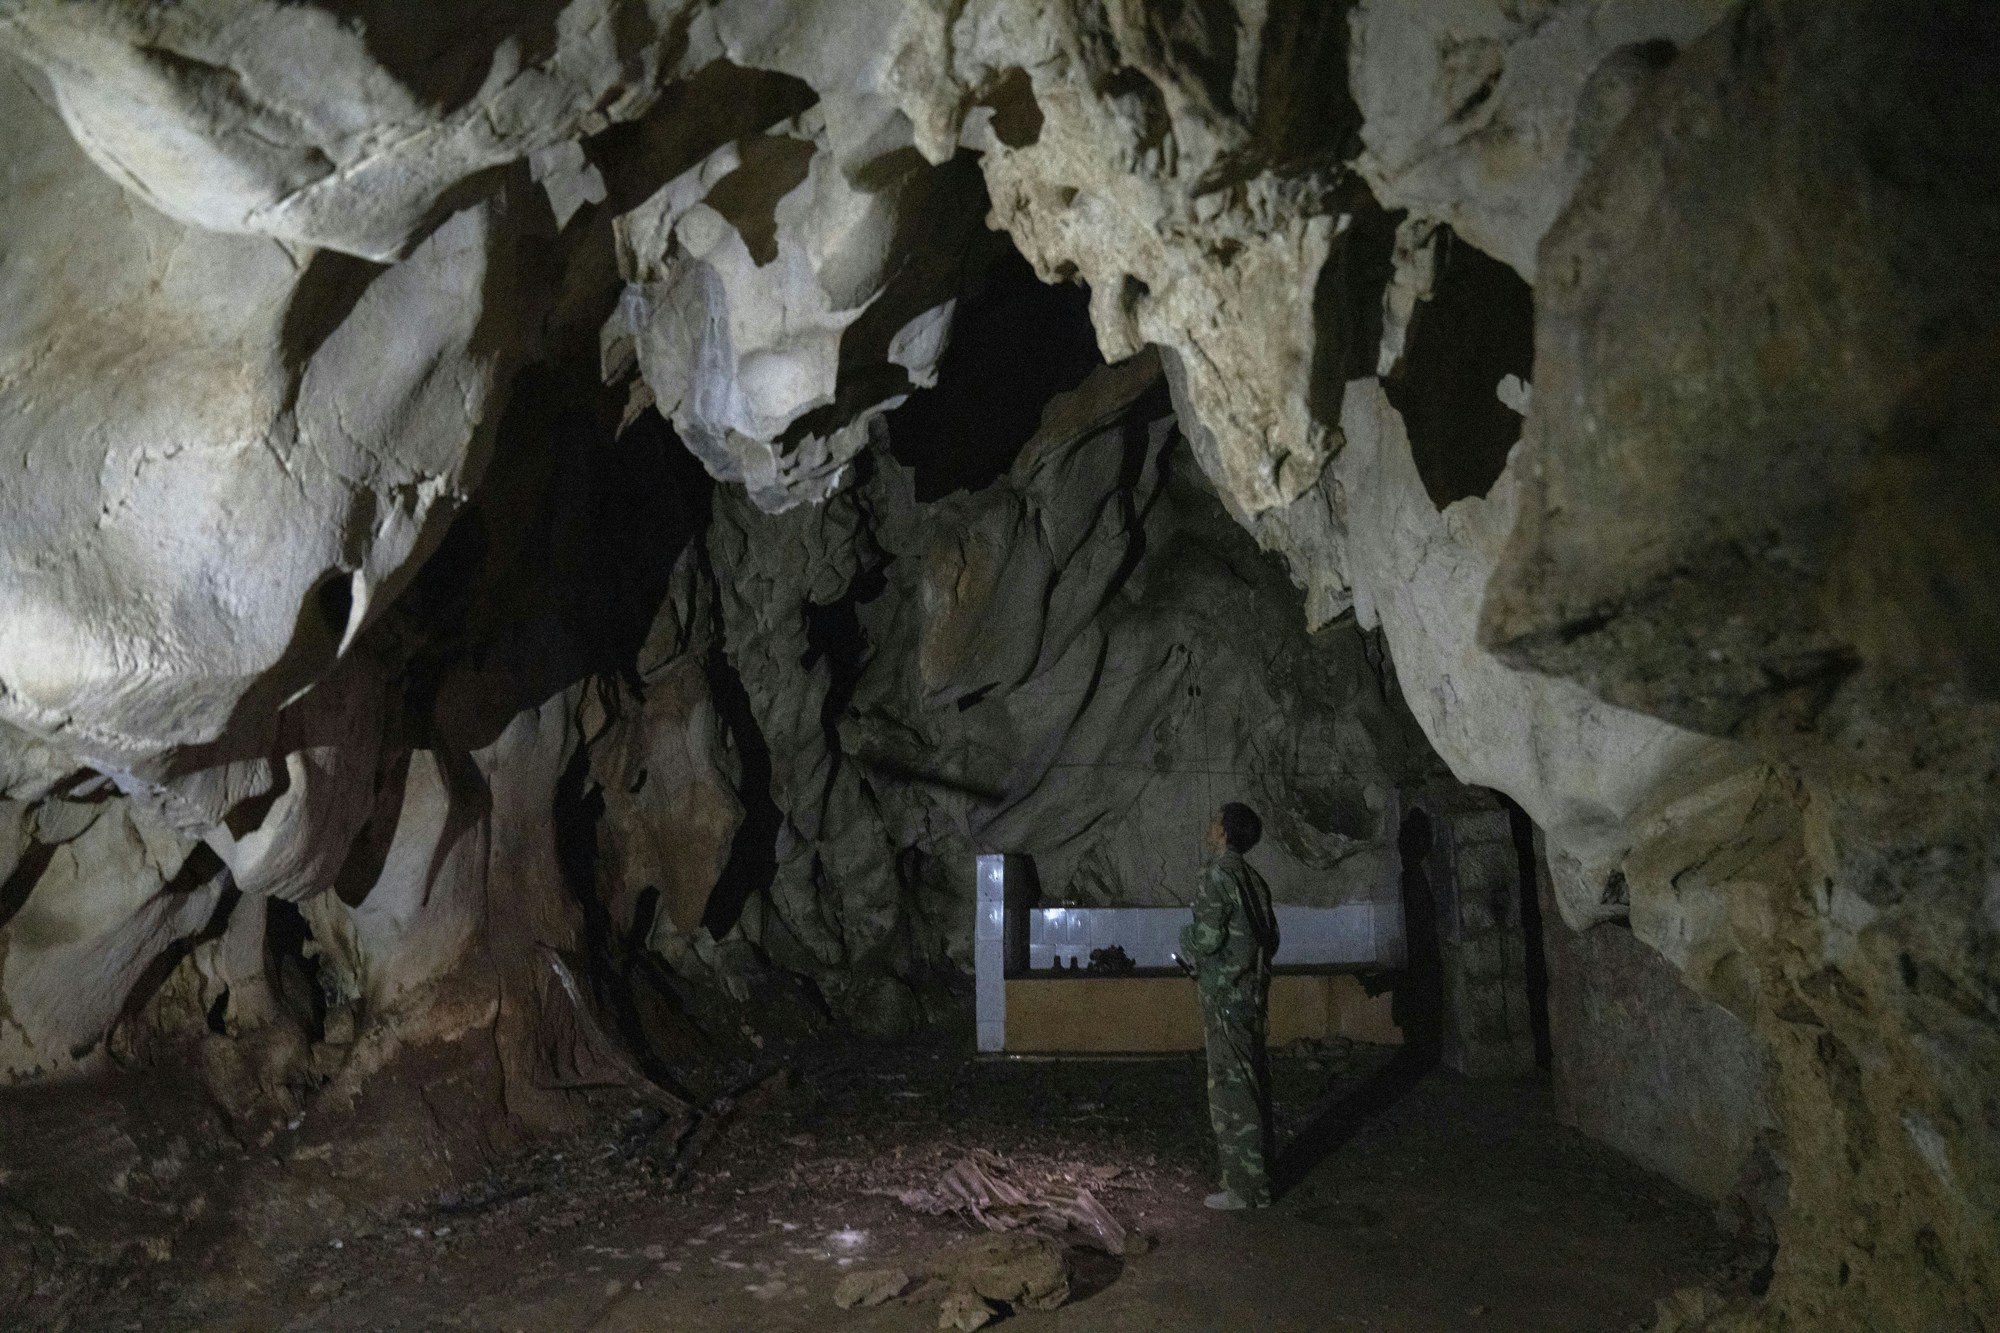 A man stands inside the abandoned Wanling cave near Manhaguo village in southern China's Yunnan province on Wednesday, Dec. 2, 2020. Villagers said the cave had been used as a sacred altar presided over by a Buddhist monk _ precisely the kind of contact between bats and people that alarms scientists. (AP Photo/Ng Han Guan)